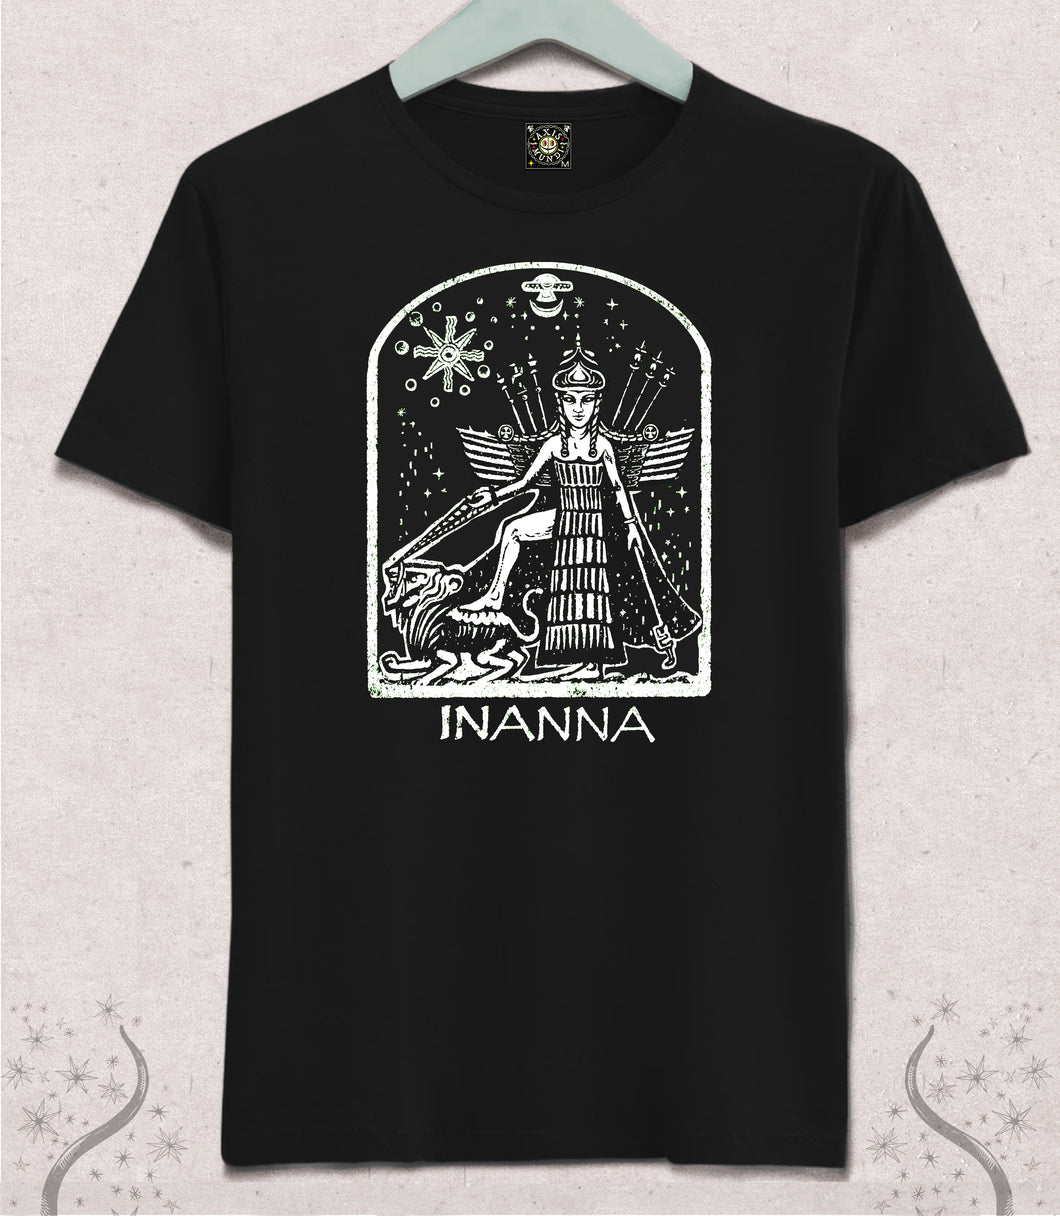 New! Inanna T-shirt,  Extraterrestrial